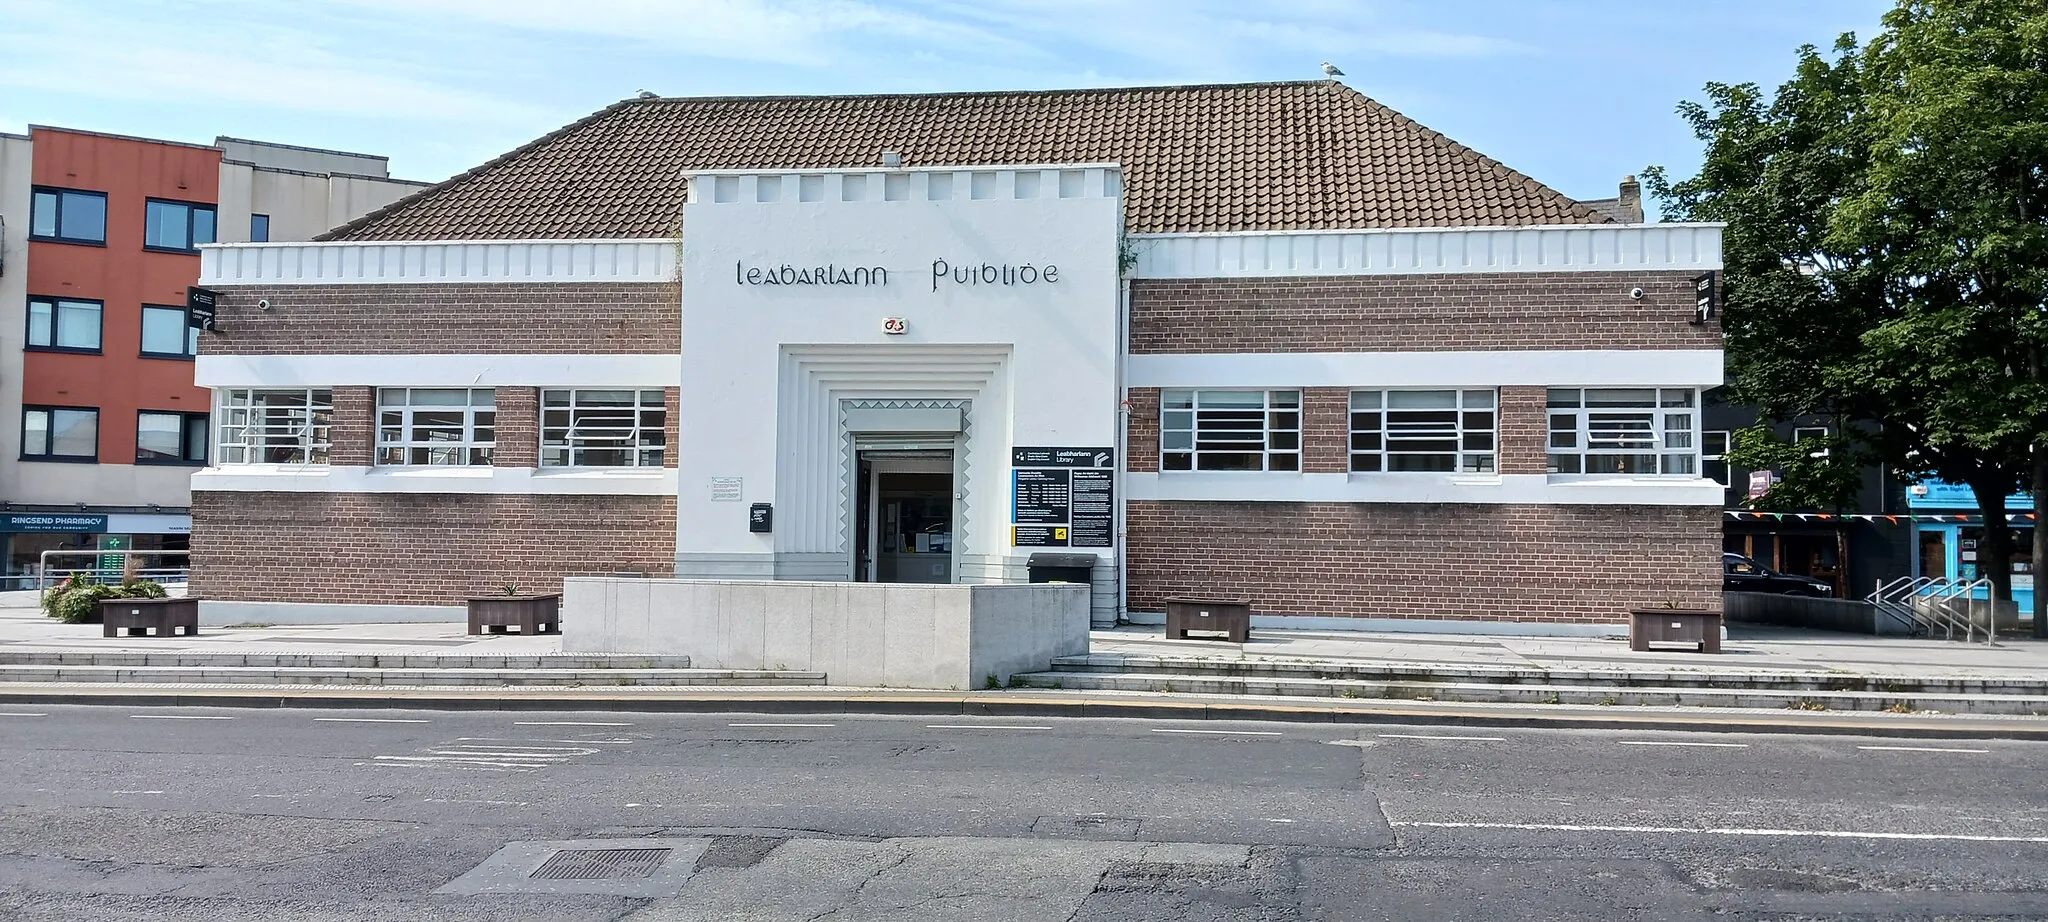 Photo showing: The front of the public library in Ringsend, Dublin.